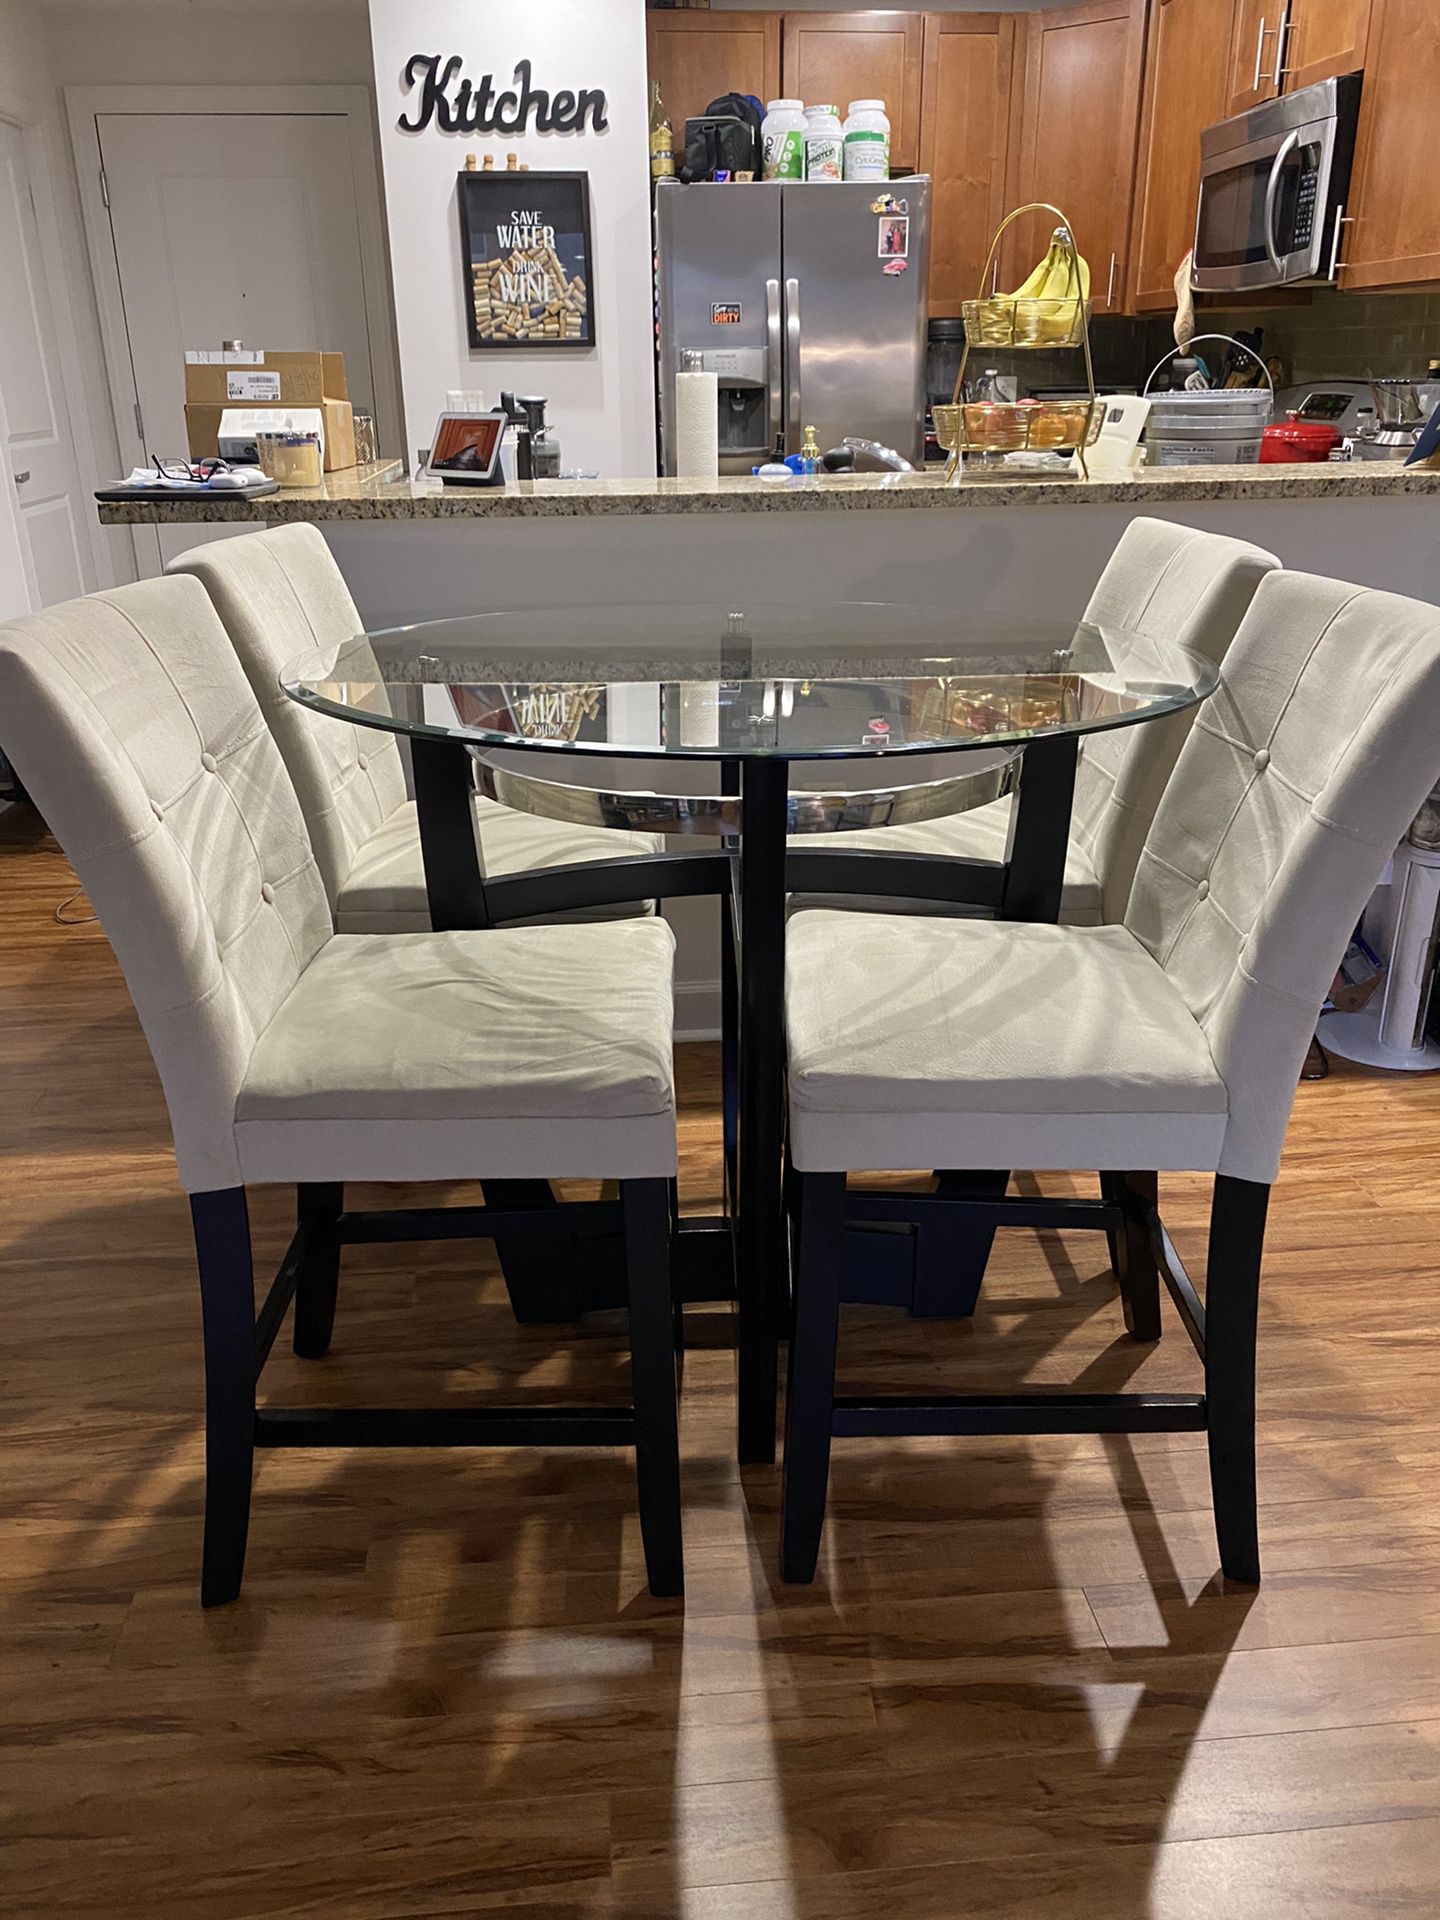 Dining table glass top with 4 chairs